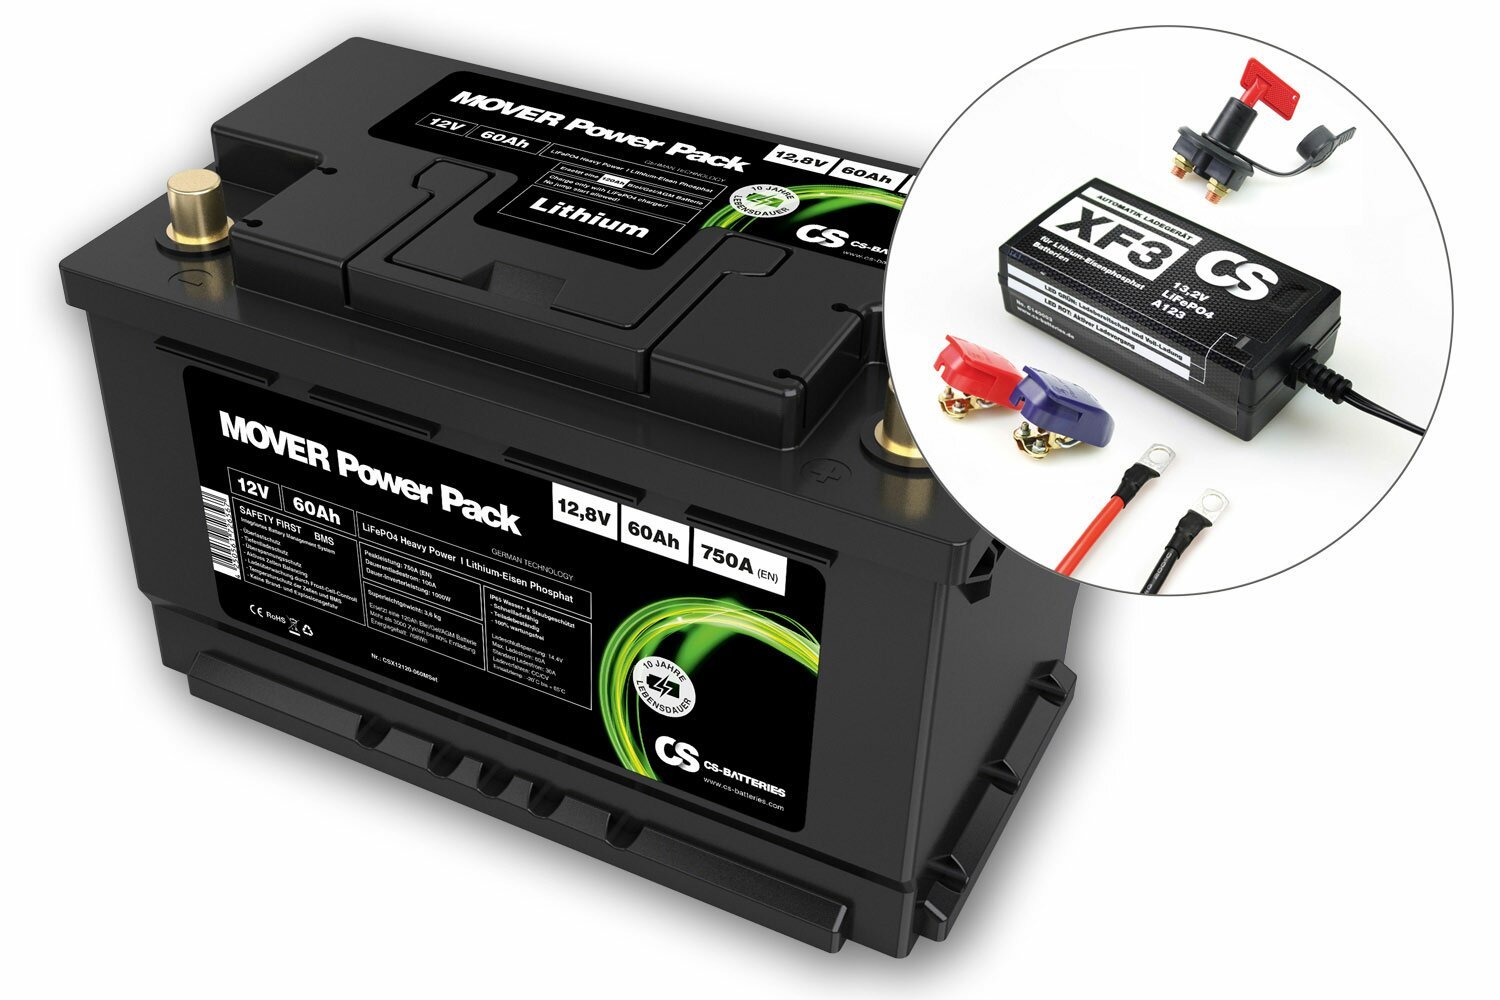 CS Lithium Lifepo4 Mover Power Pack Set 12.8V / 60AH / PB -EQ 120AH - ~ 9.1kg with charger